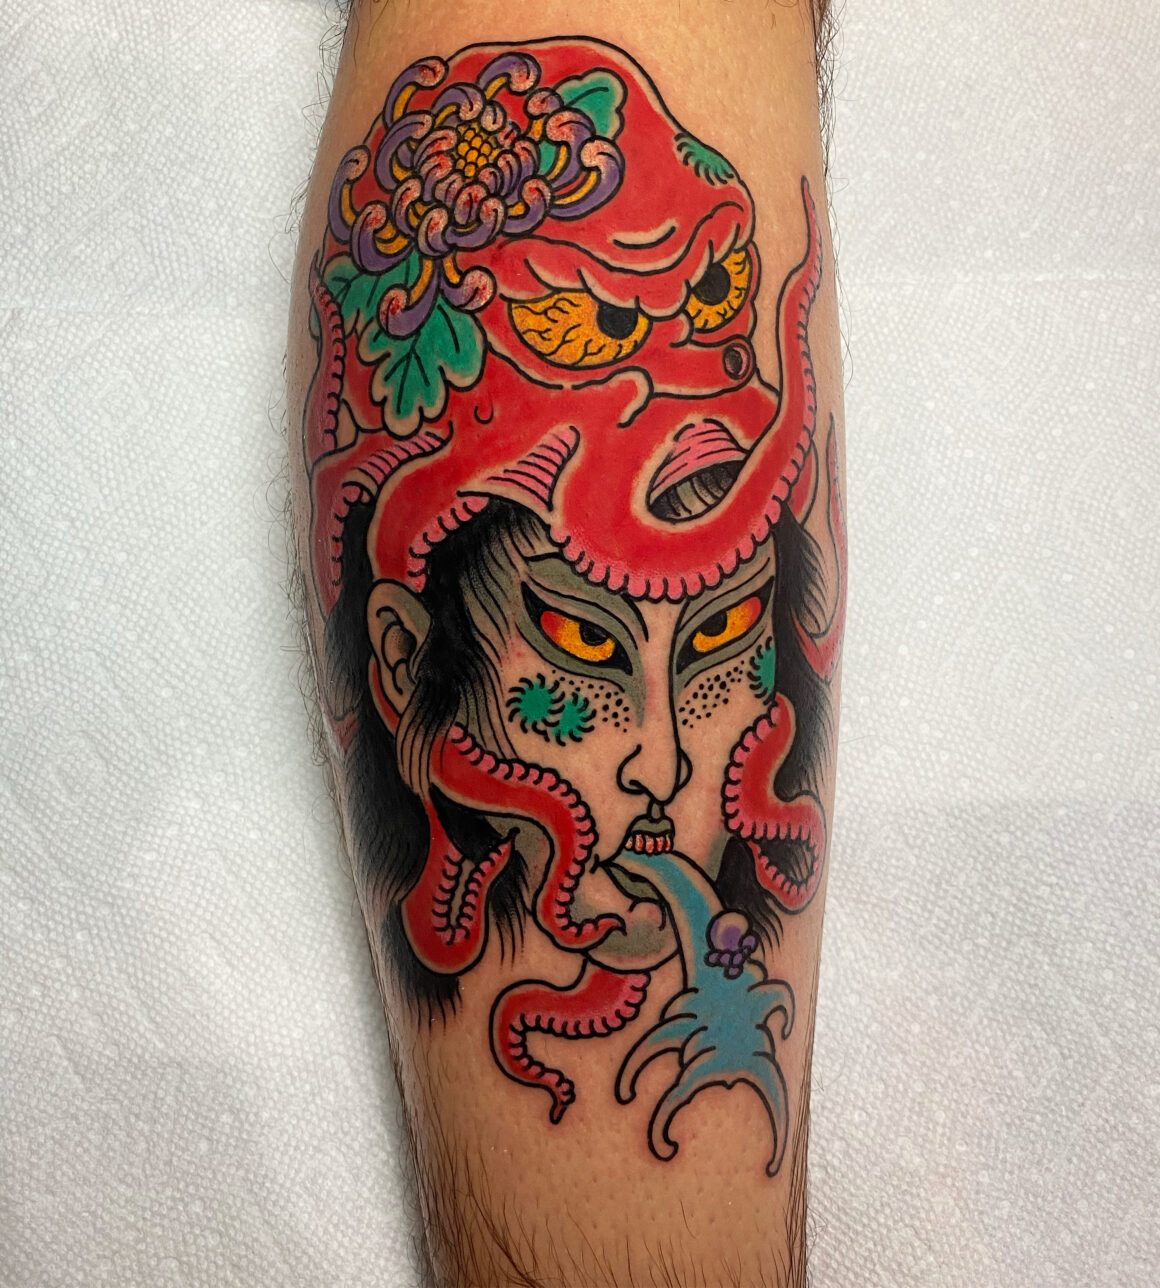 Tattoo by Henbo, @henbotattooing